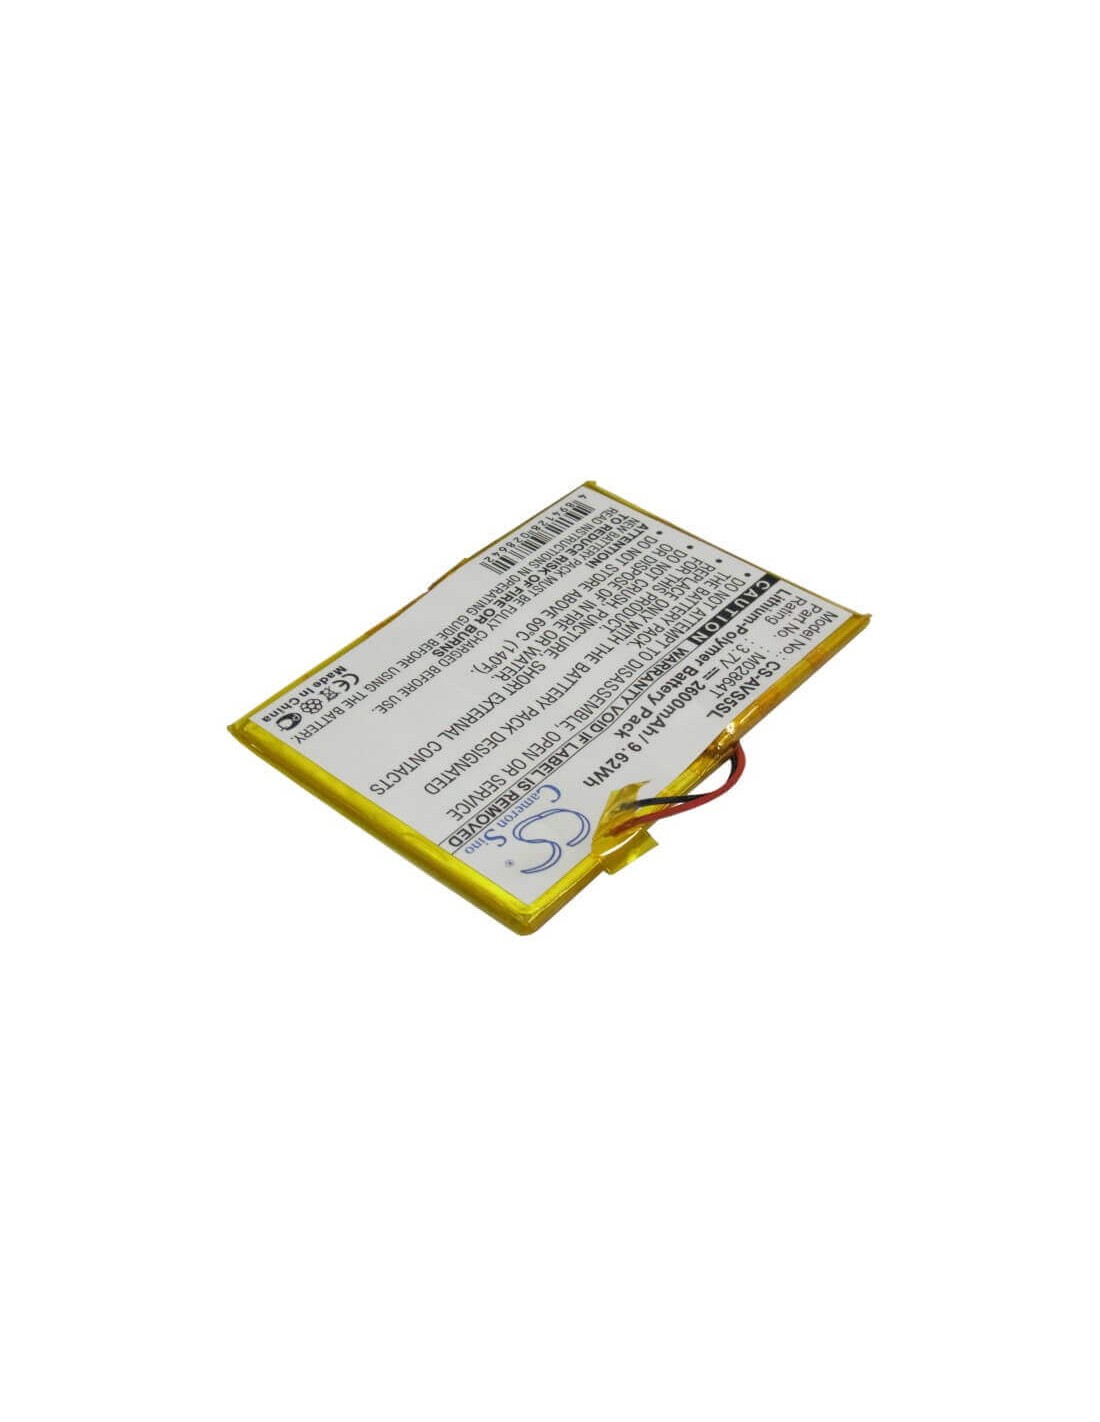 Battery for Archos 5 60gb 3.7V, 2600mAh - 9.62Wh